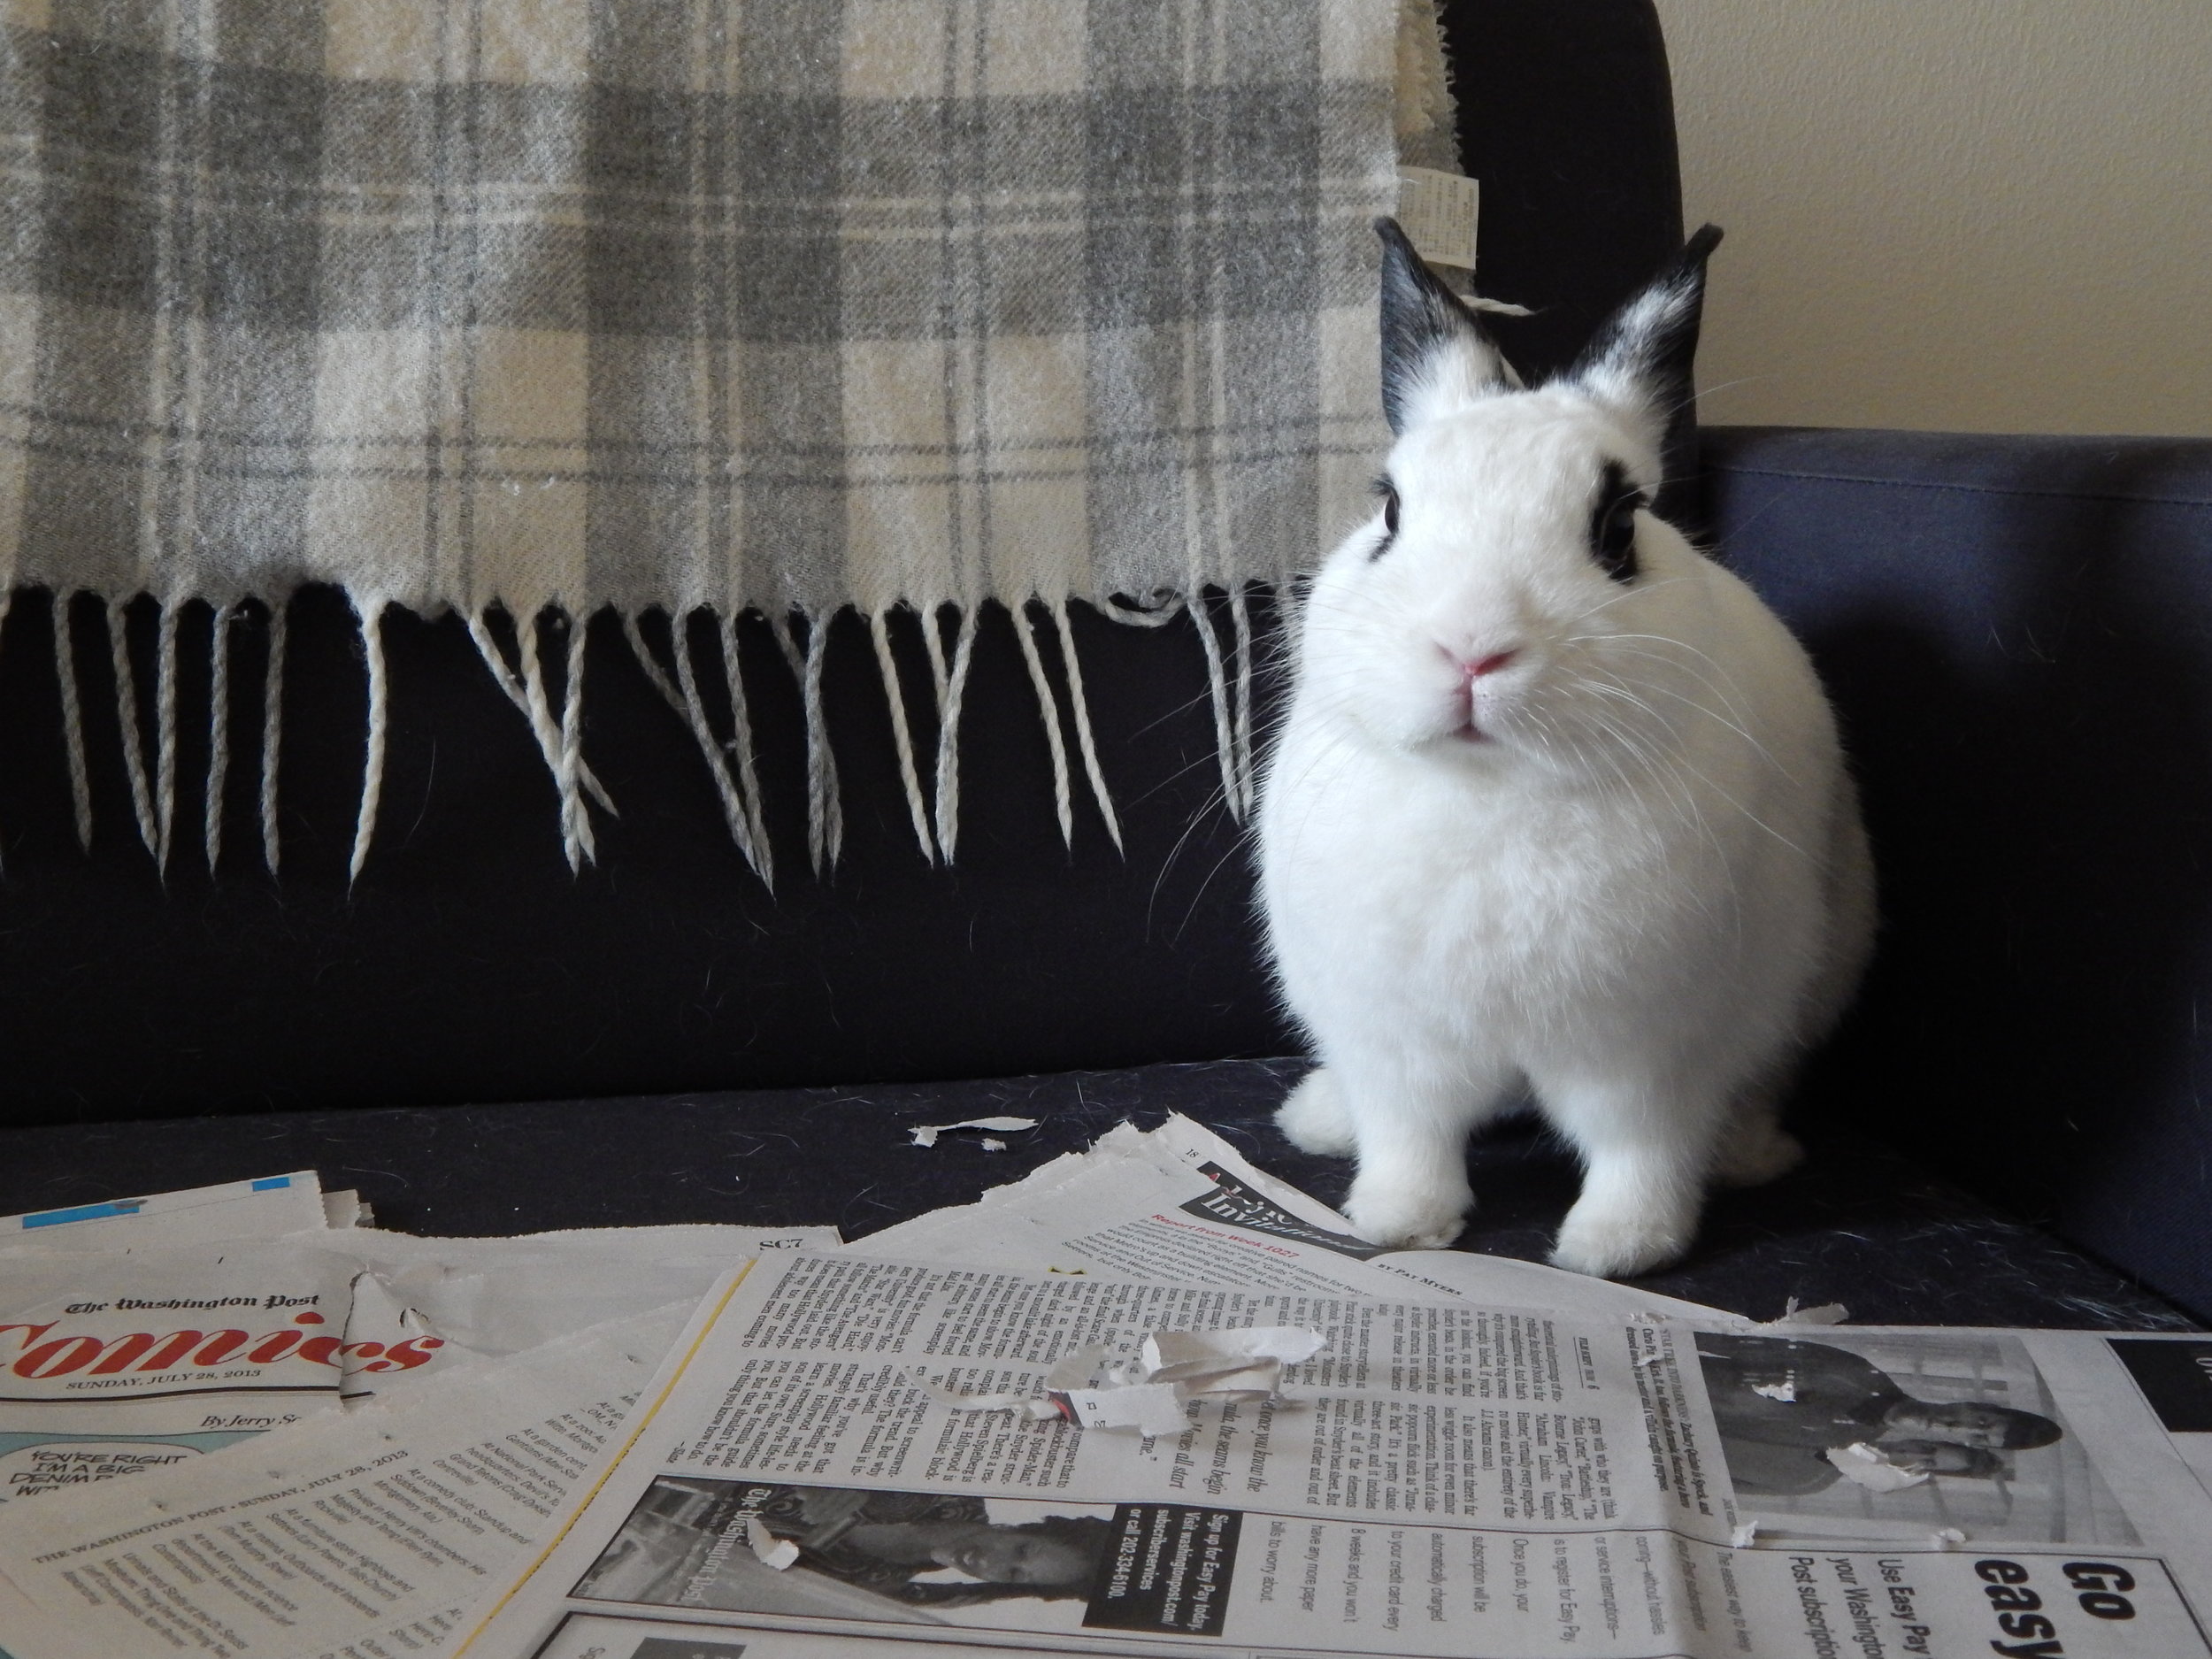 Oh, You Wanted to Read the Paper Before I Shred It? Hurry Up - The Clock Is Ticking!